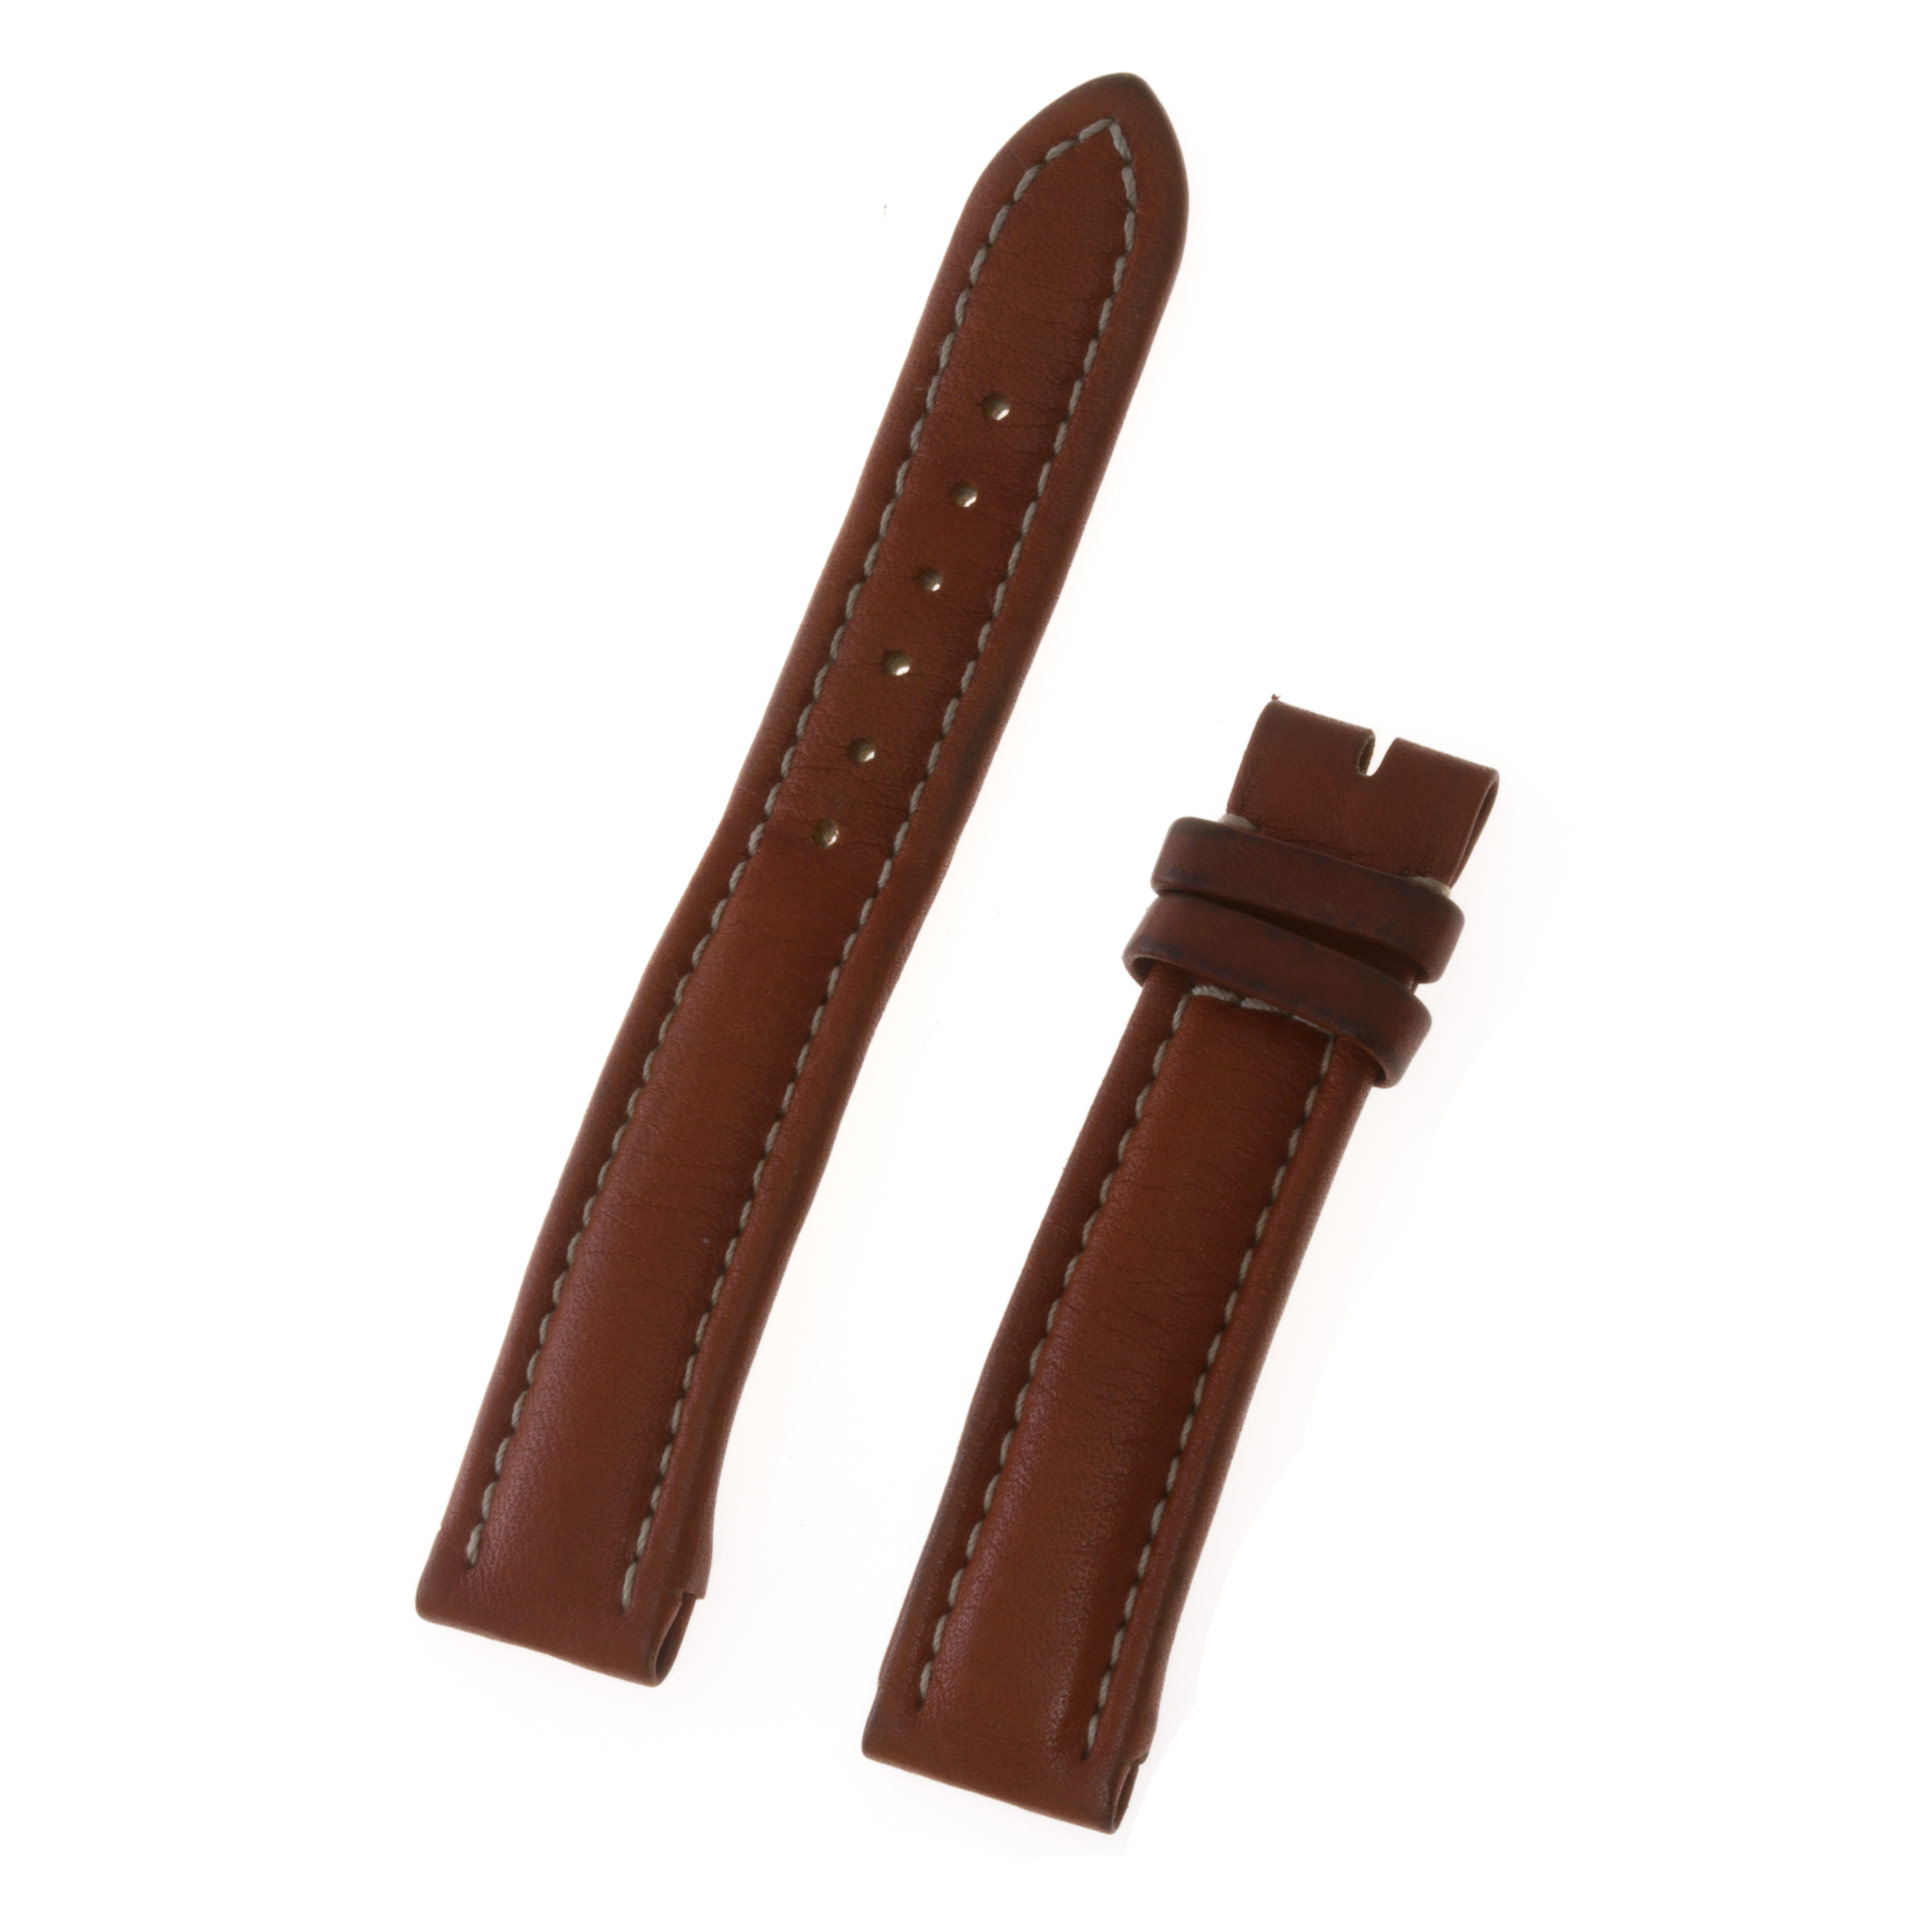 Breitling brown leather strap with white stiching (18x16)